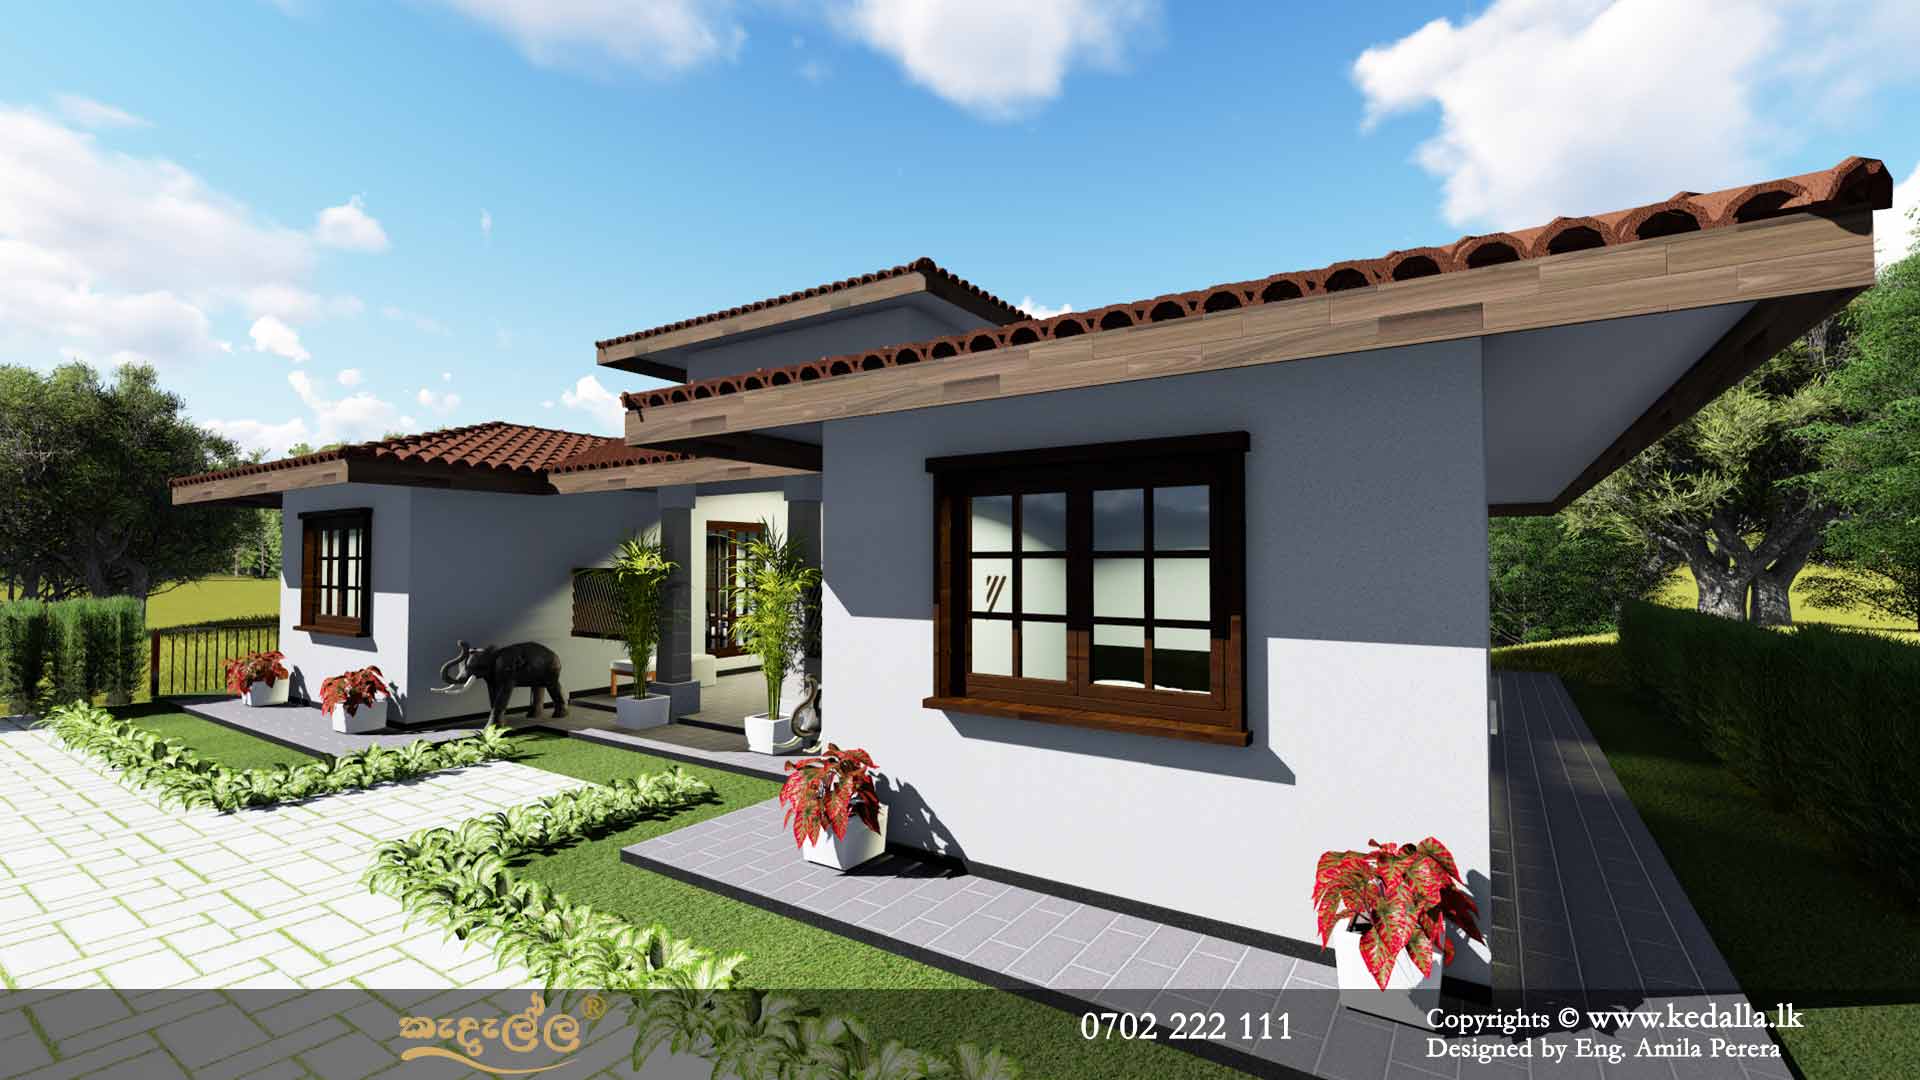 Home designers and draughtsman in Kandy sri lanka designed house plans for handicap/diable persons